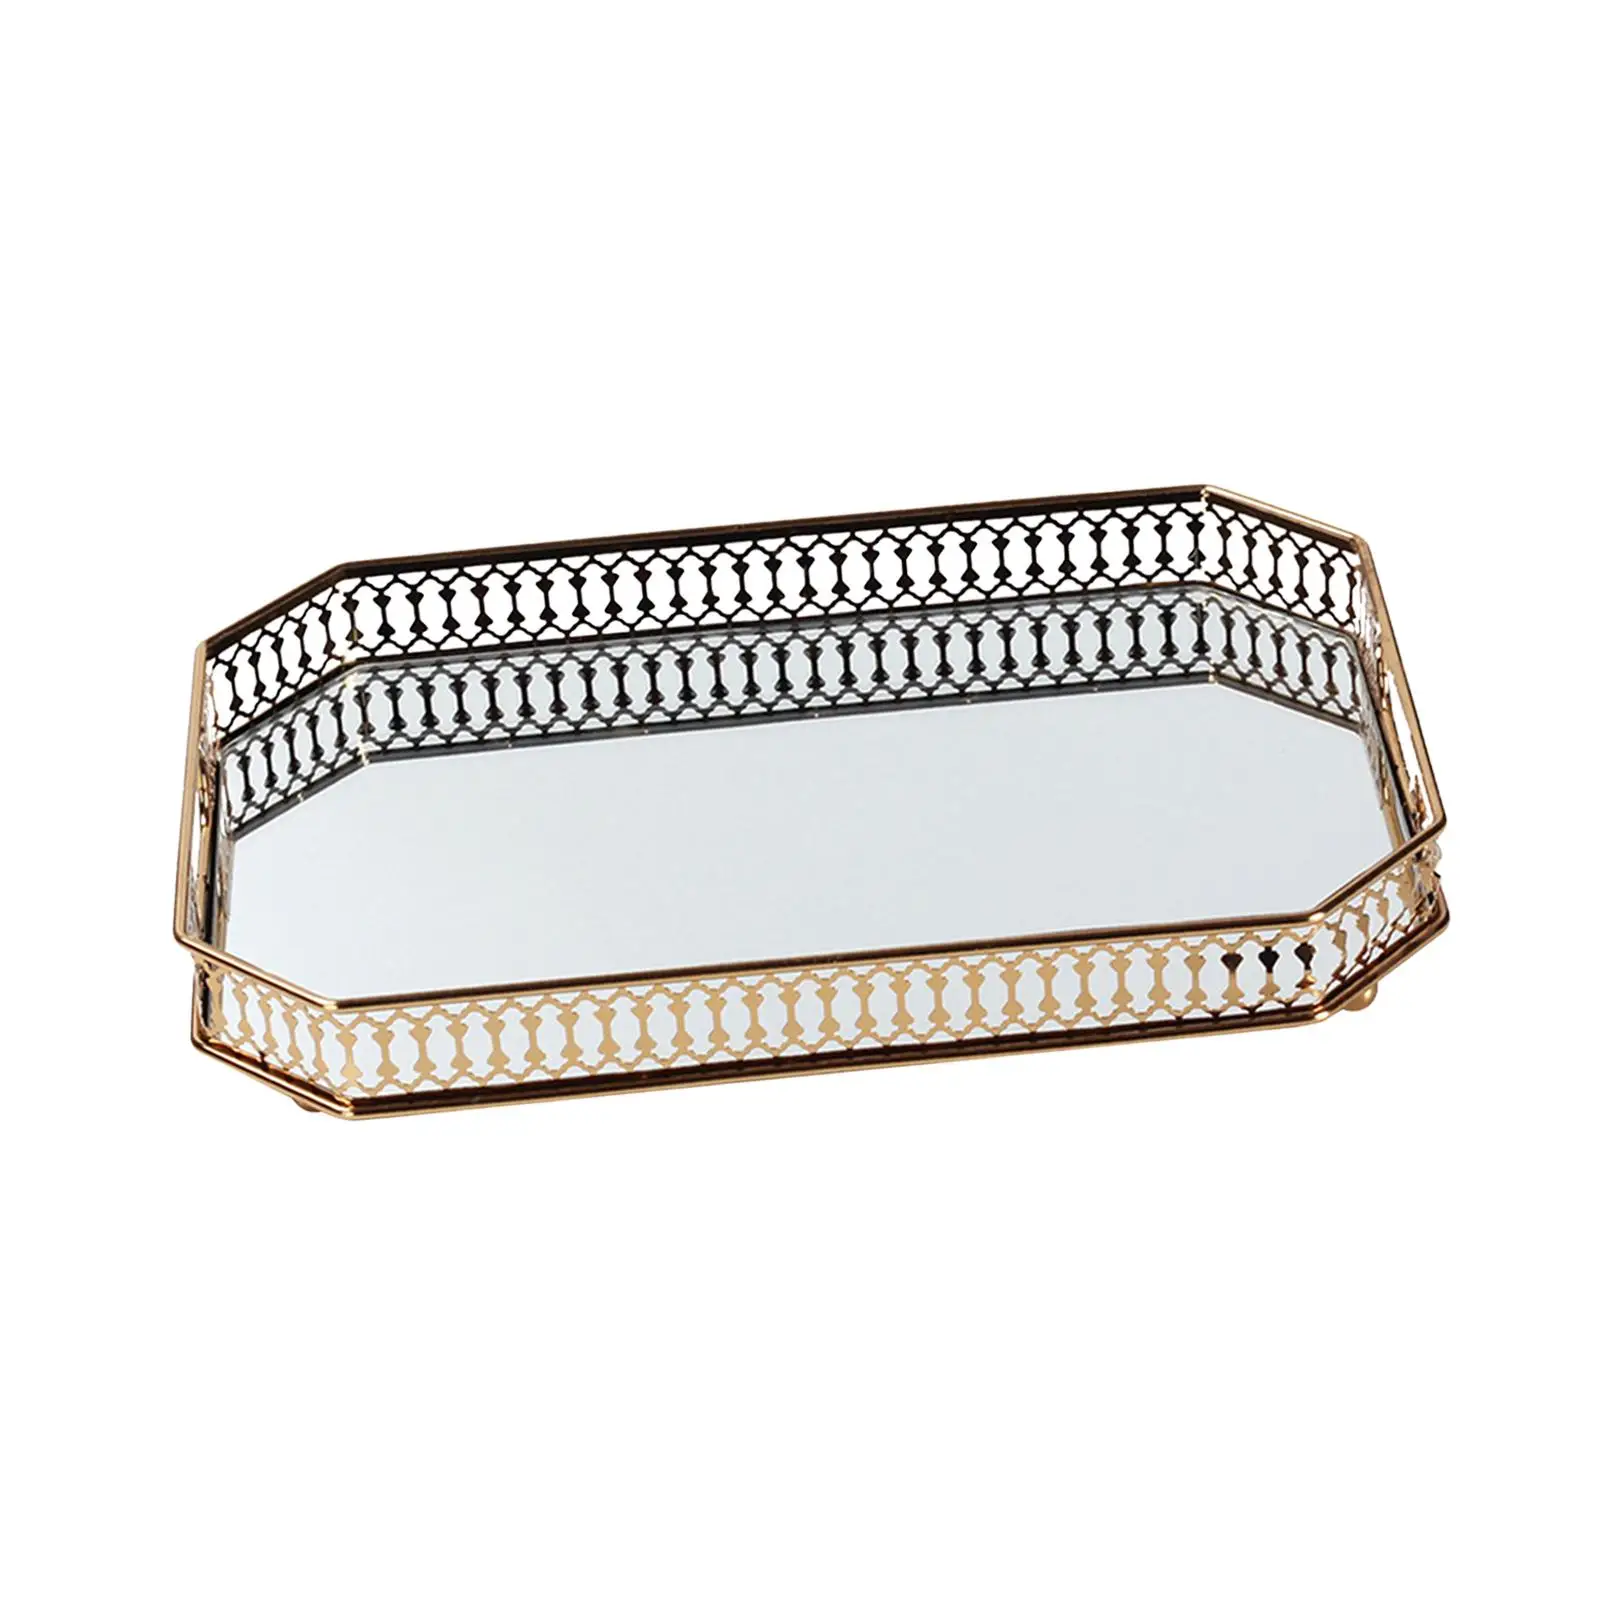 Mirror Serving Tray Serving Plate Modern Decorative Mirrored Tray for Vanity for dessert Food Snack Cake Cosmetic Storage